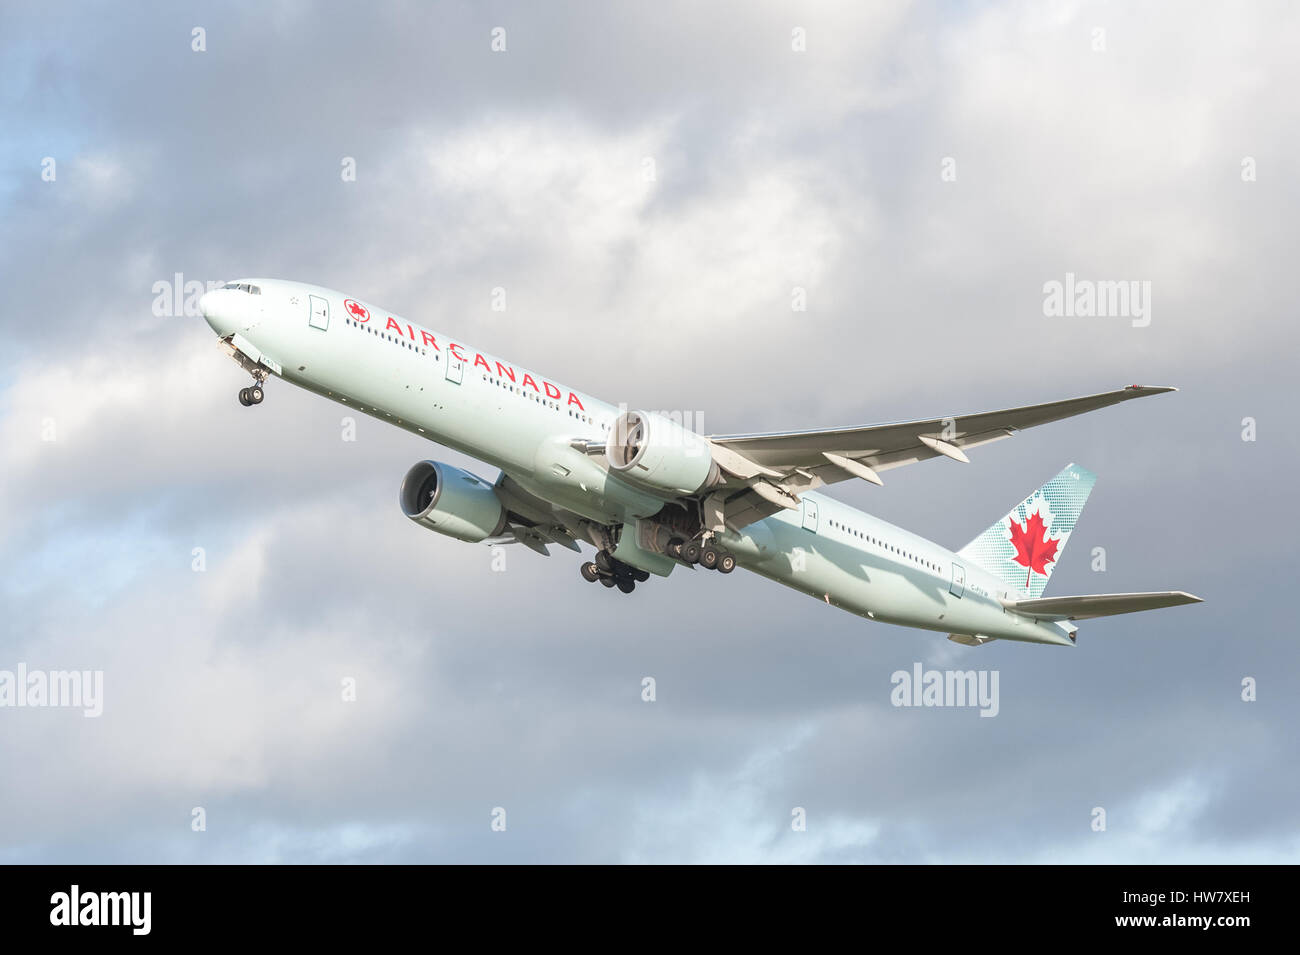 Air Canada Boeing 777-333 (C-FIVW) in arctic green livery, departing Heathrow, UK bound for Vancouver Stock Photo